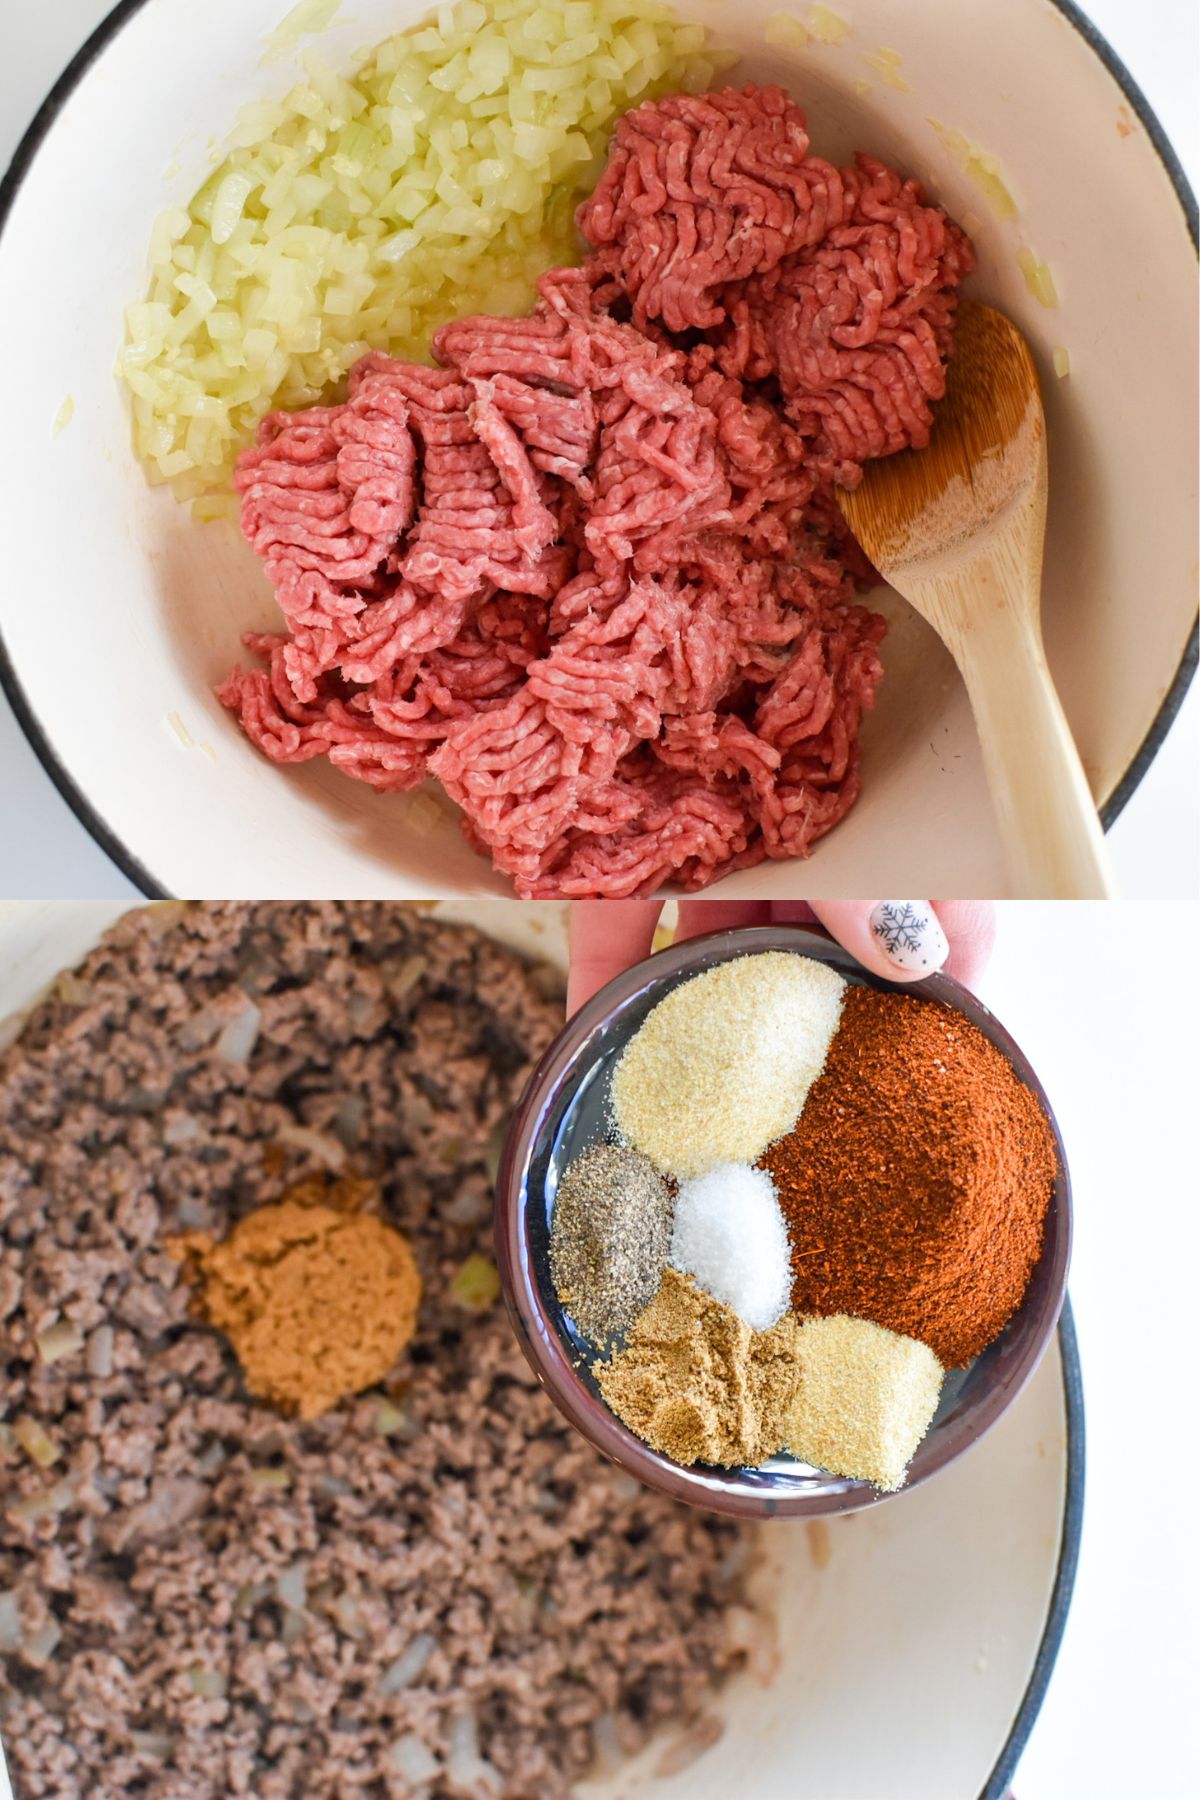 A pot with cooked onion and raw ground beef and a pot with cooked ground beef and spices being added to it.